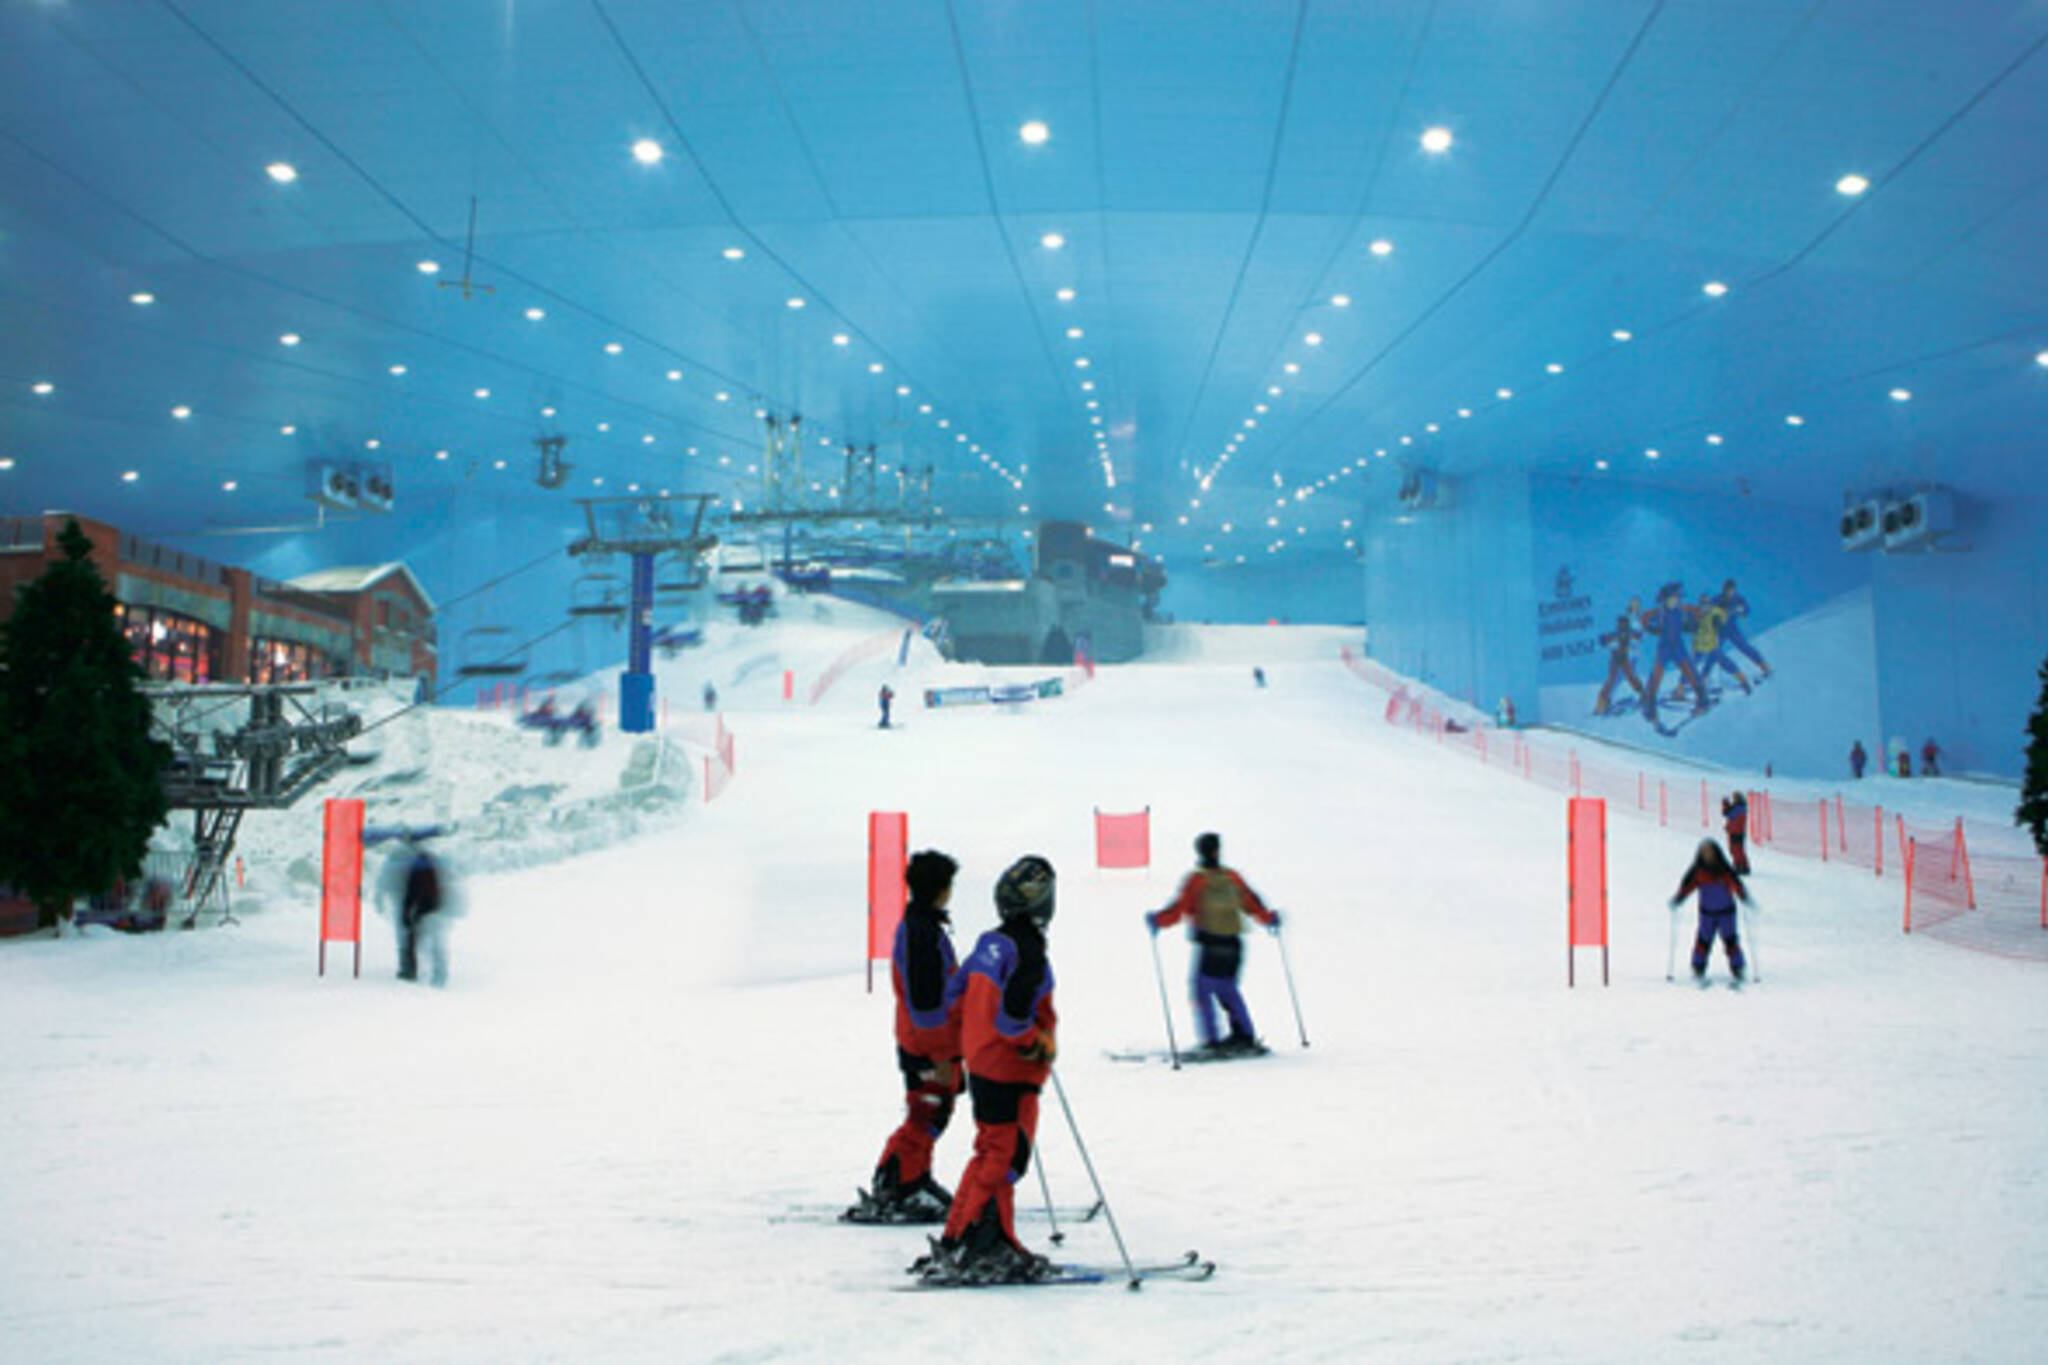 Toronto is getting an indoor ski and snowboard hill